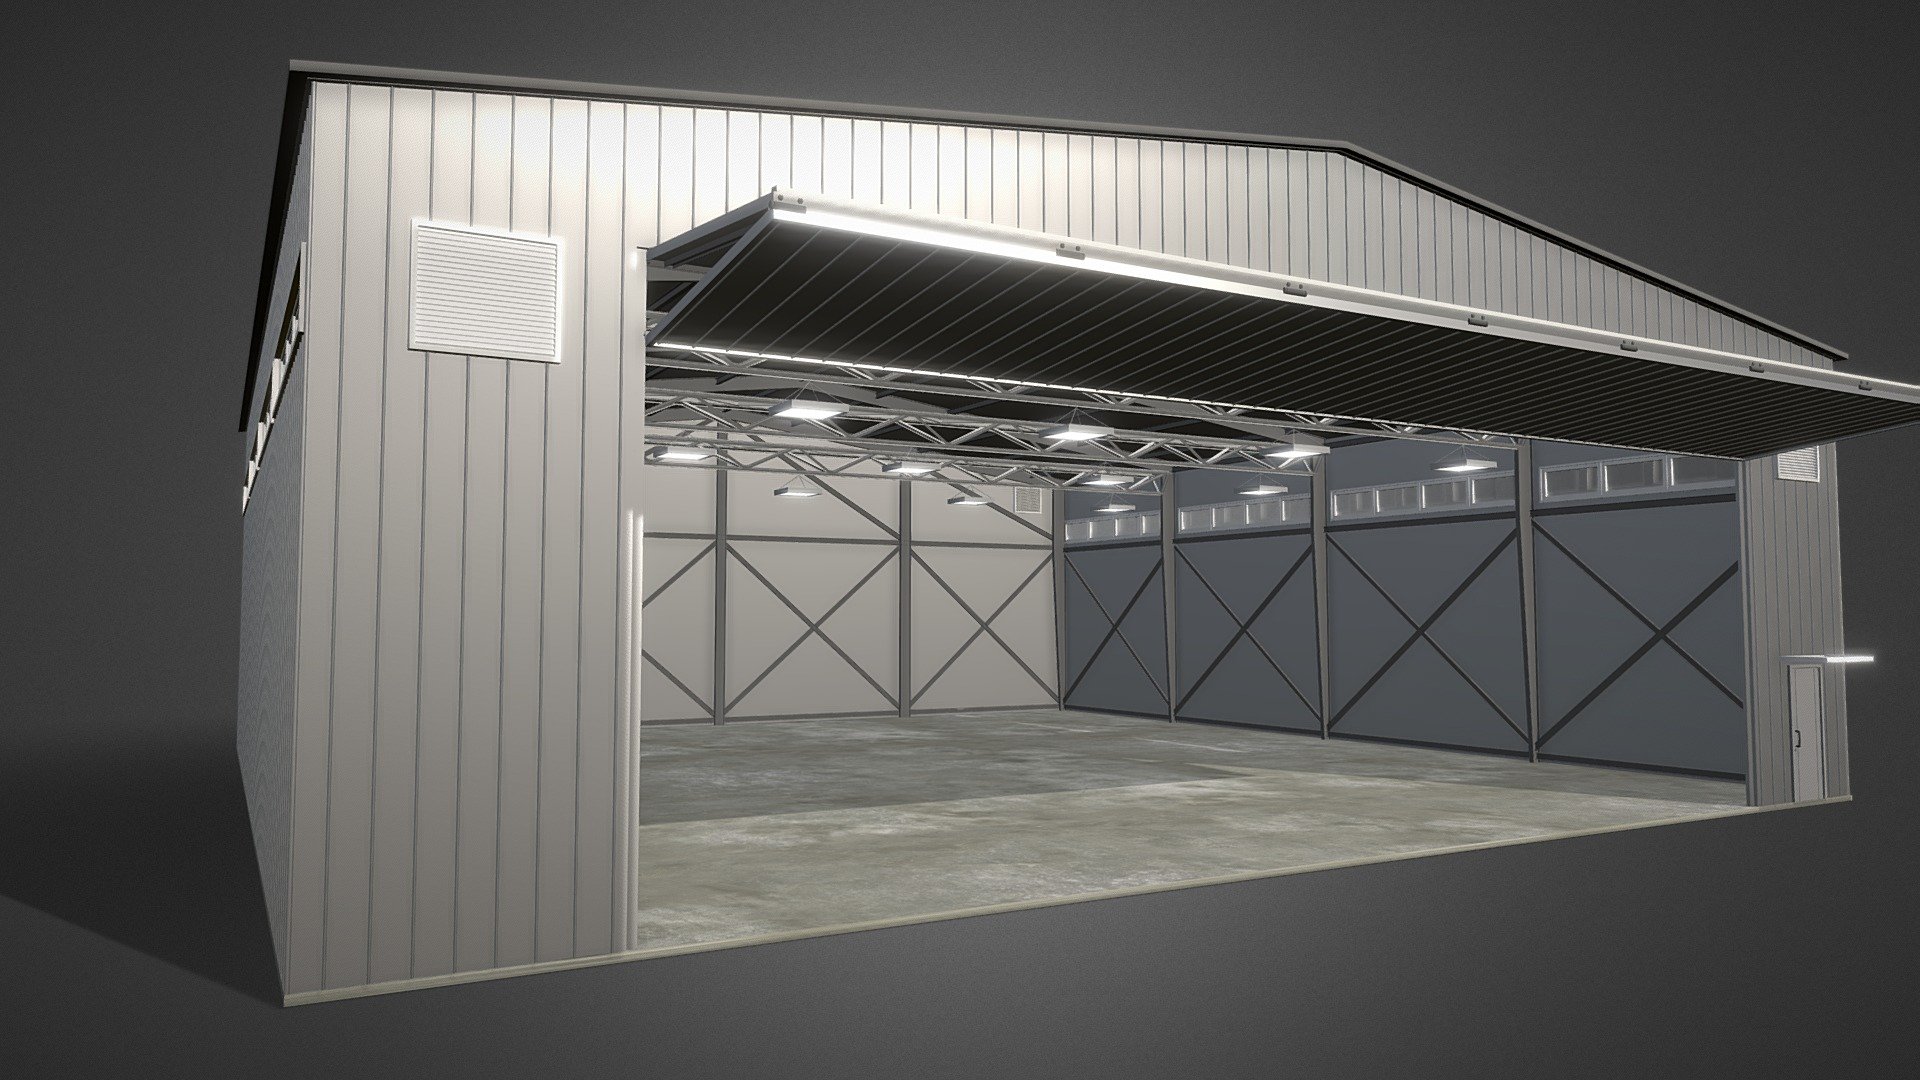 It is HQ Hangar with sliding gates.
Al details most authentically.
Low poly but looks great
You can use this models in your game projects, advertisements and animations 3d model